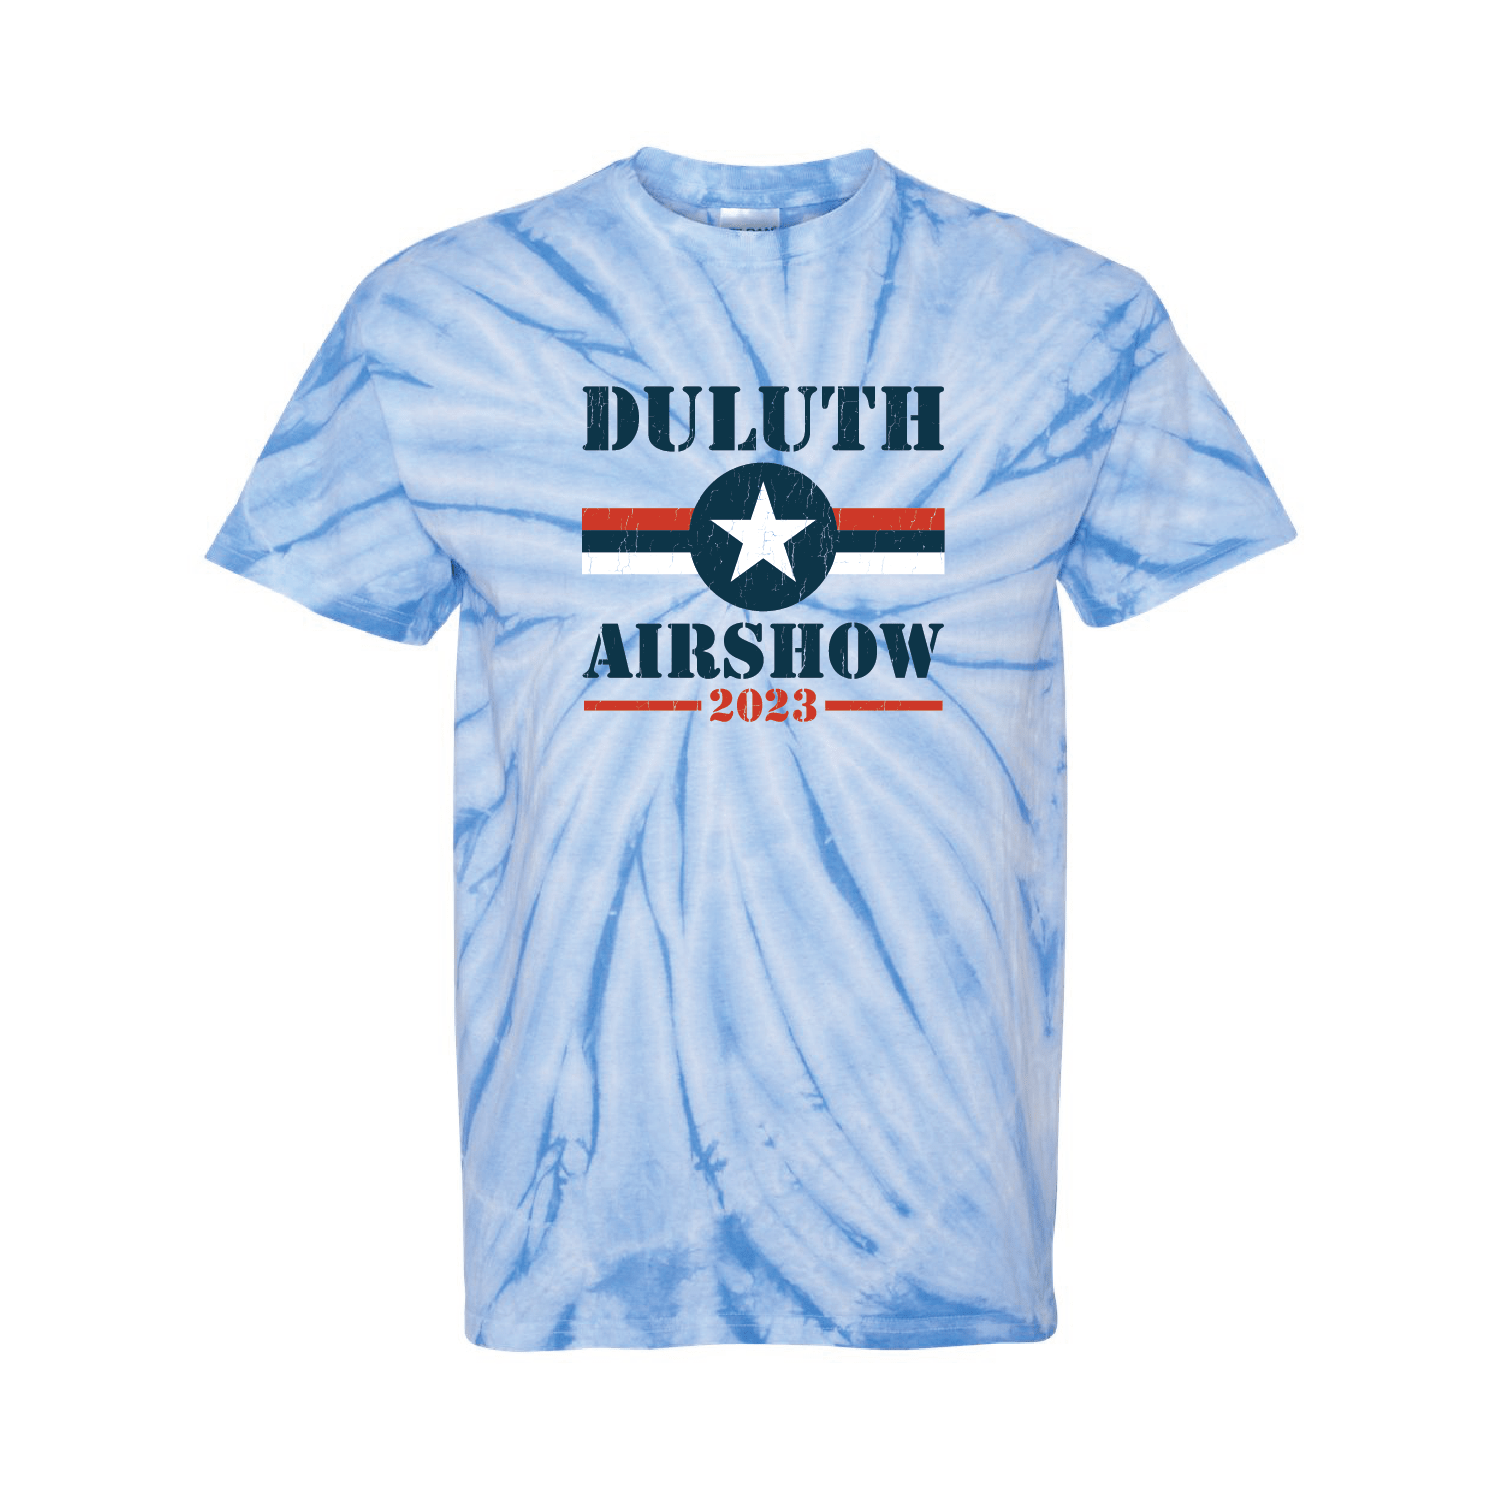 Duluth Airshow 2023 Tie-Dyed T-Shirt - DSP On Demand